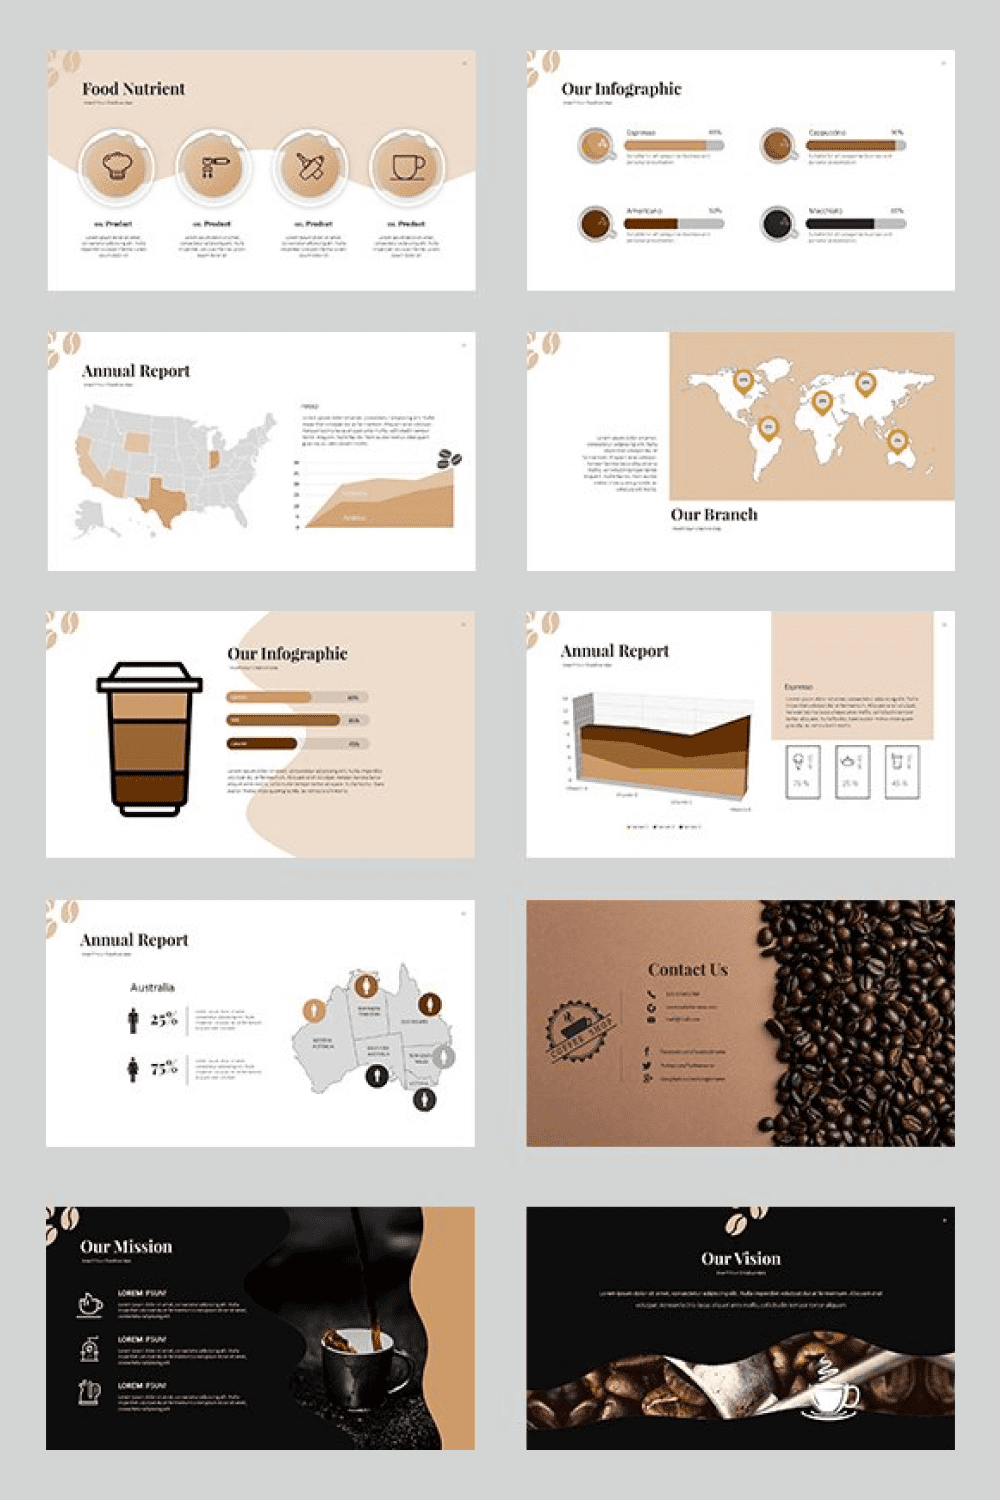 Template in brown in coffee style.